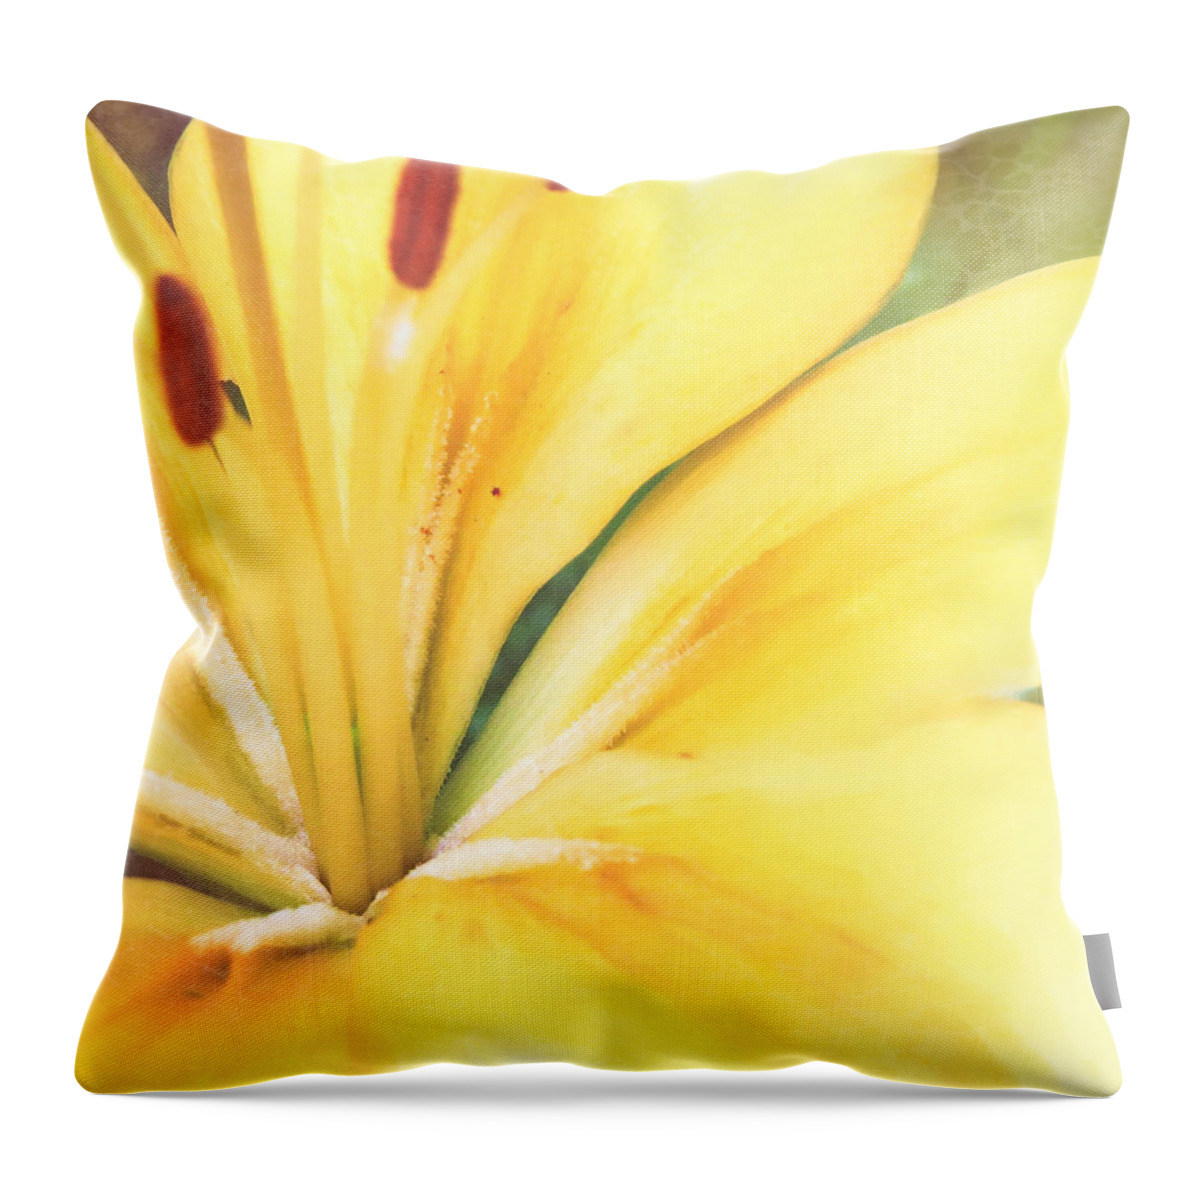 Blossom Throw Pillow featuring the photograph Citrine Blossom by Sand And Chi